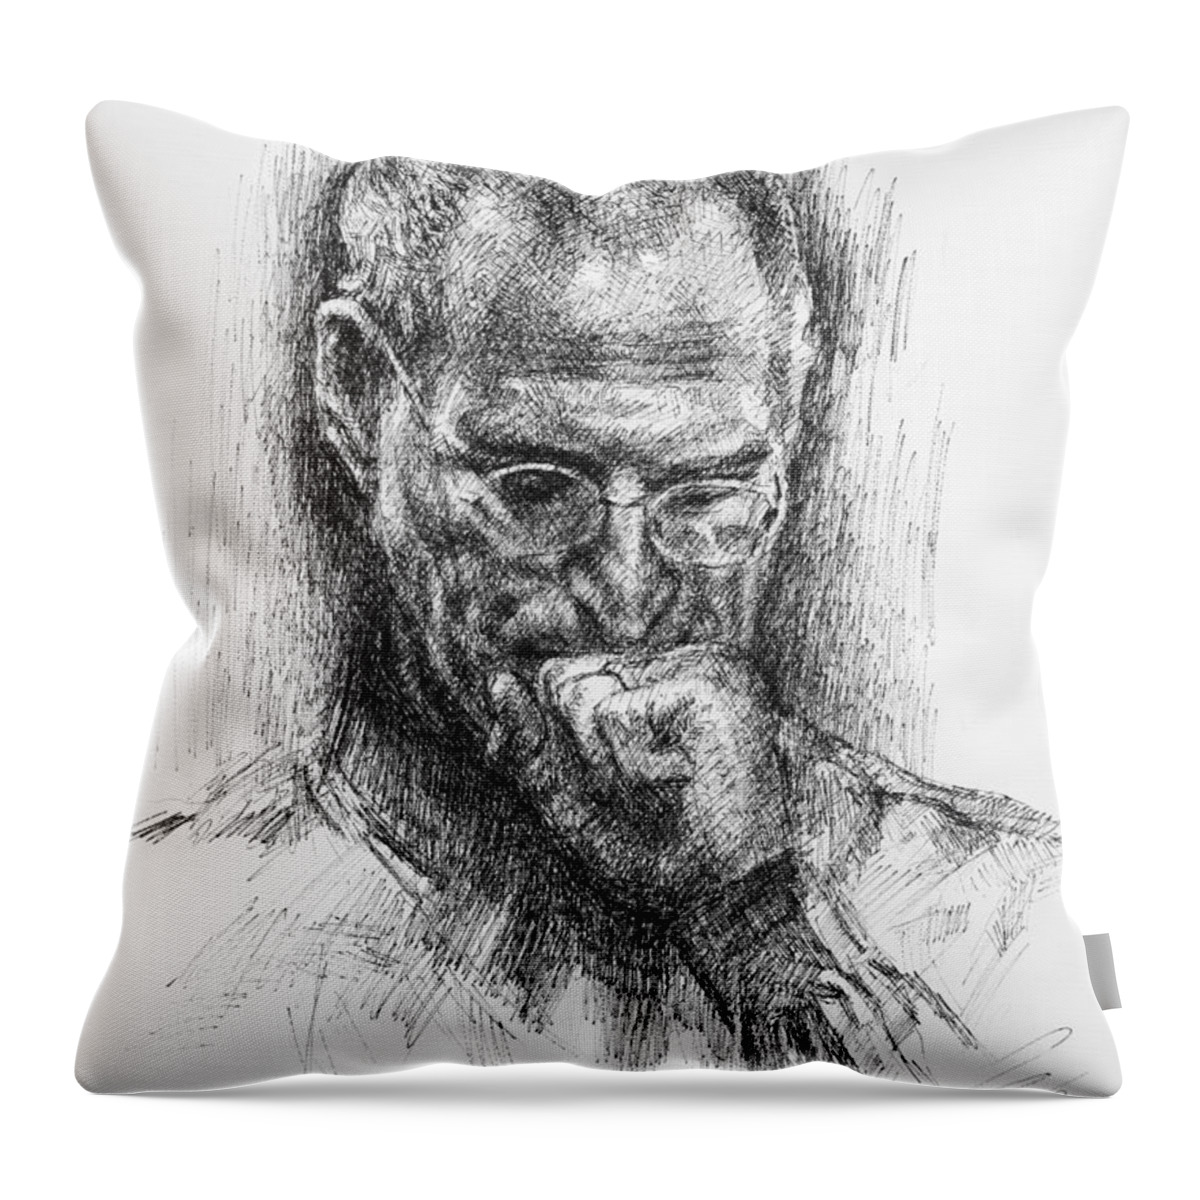 Steve Jobs Throw Pillow featuring the drawing Steve Jobs by Ylli Haruni